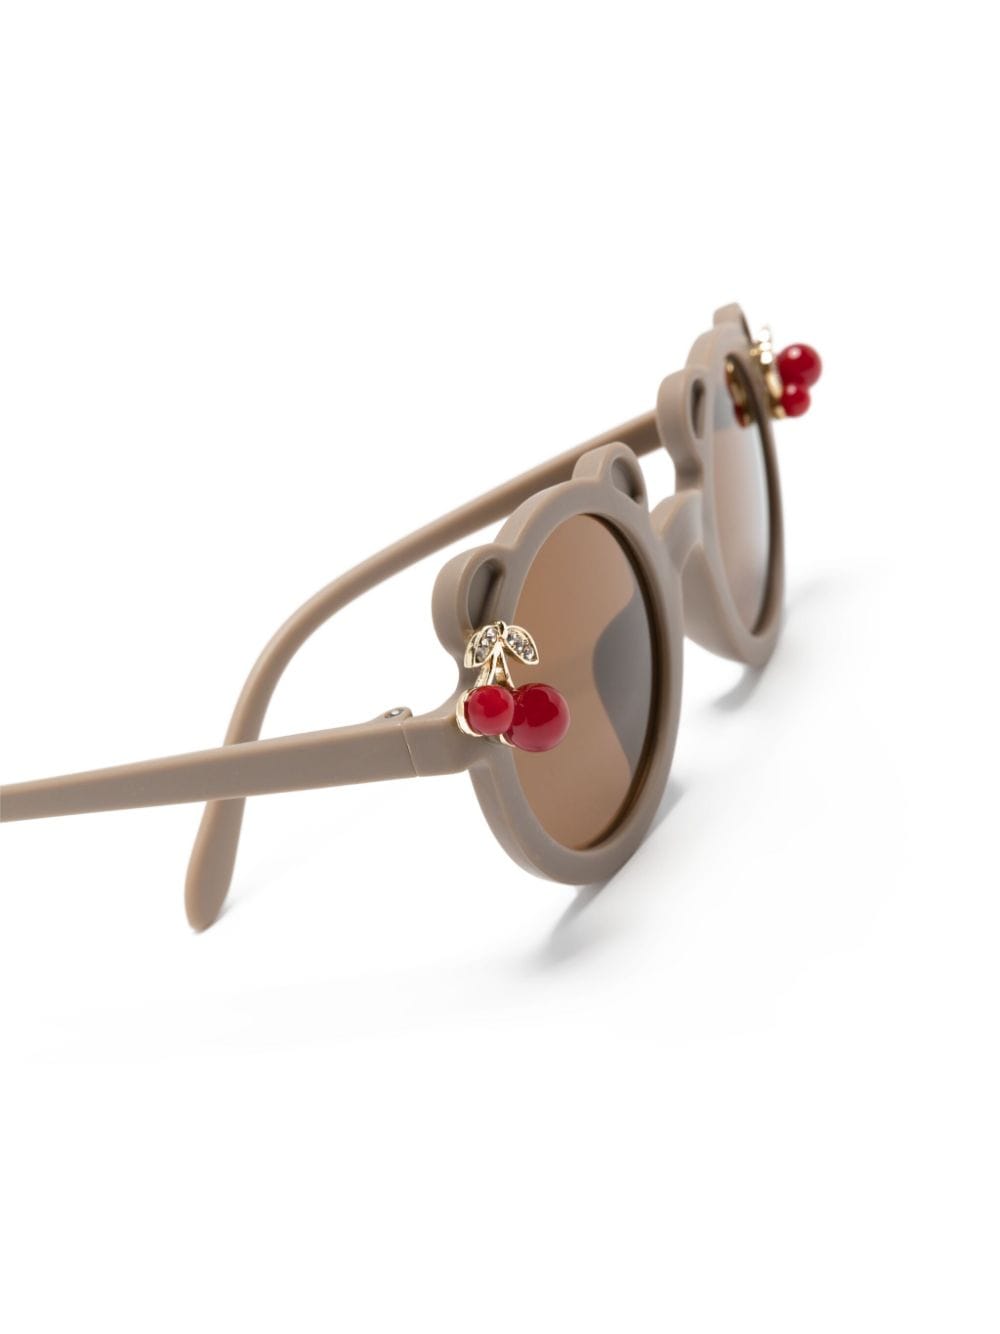 Beige glasses for girls with cherries